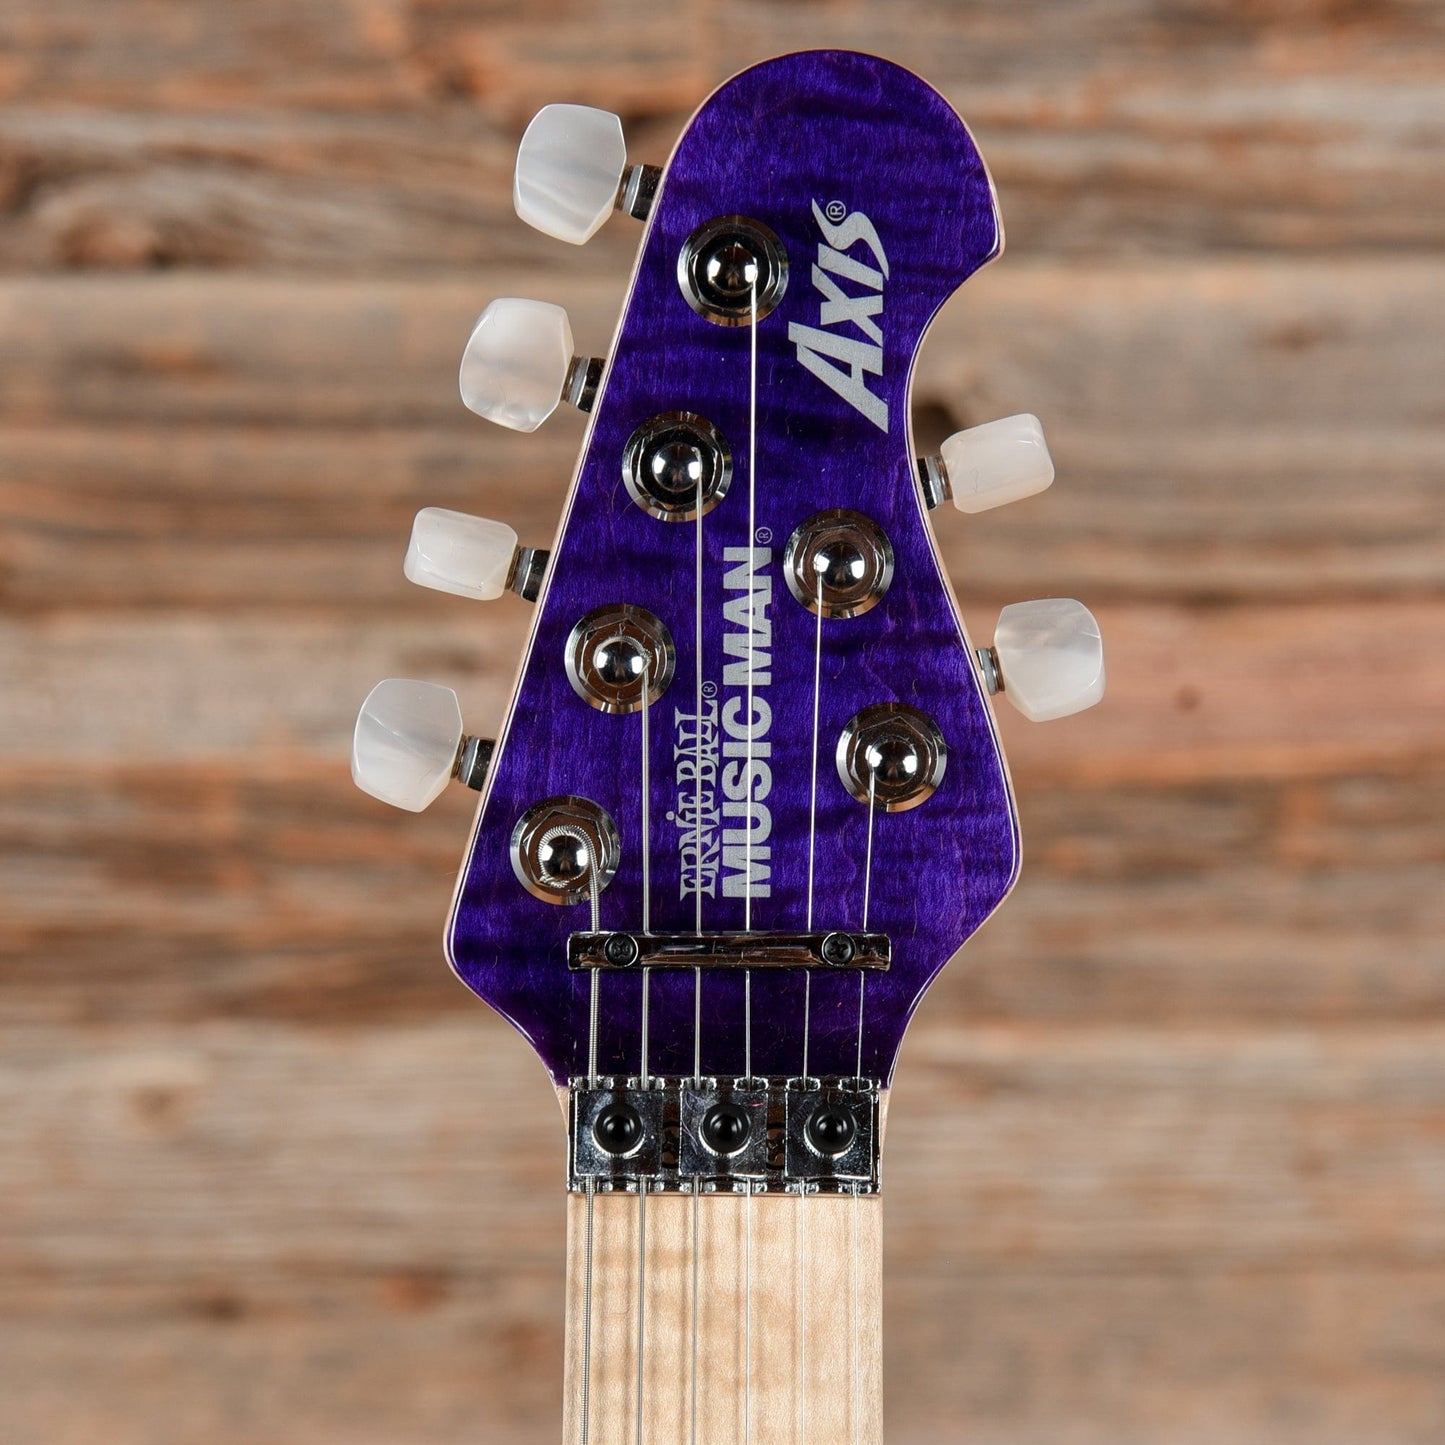 Music Man BFR Nitro Axis (1 of 100) Translucent Purple 2023 Electric Guitars / Solid Body